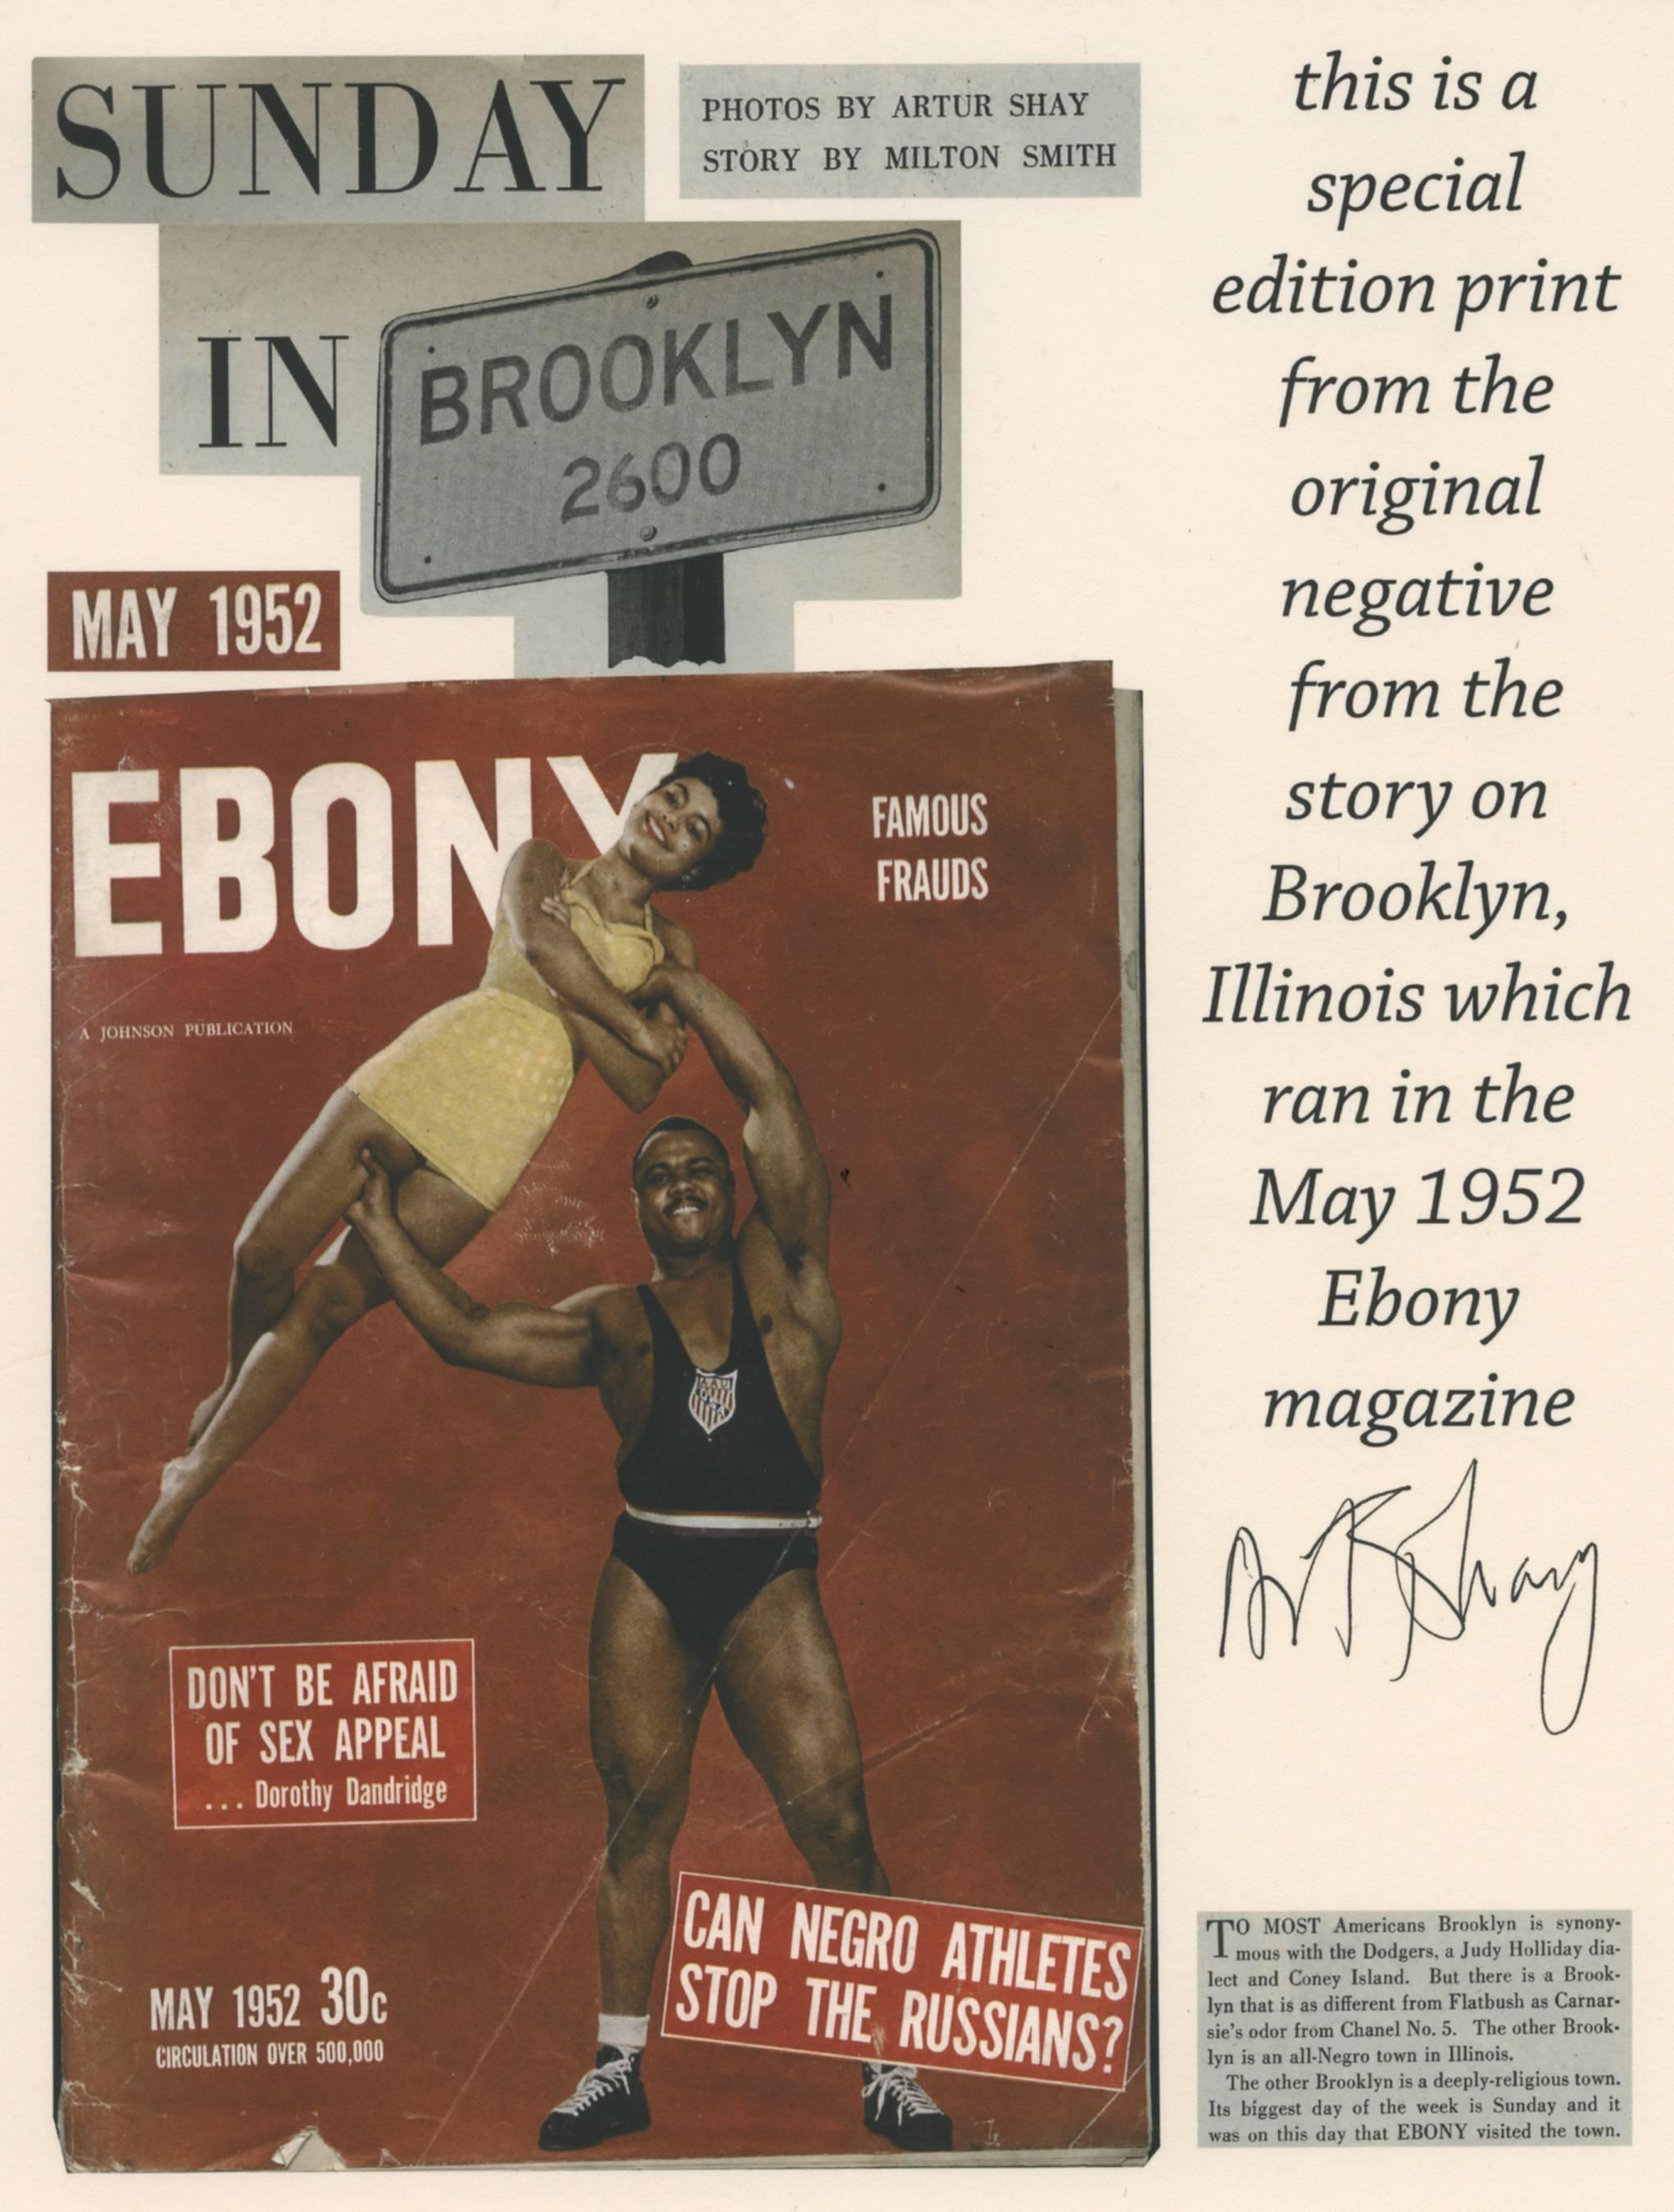 Art Shay
Brooklyn: Sisters, 1952
silver gelatin print
24.25 x 20.25 framed
ASY103

Art Shay photographed the community of Brooklyn, IL for Ebony Magazine, 1952.  These photographs are the result of  that experience.
Brooklyn (popularly known as